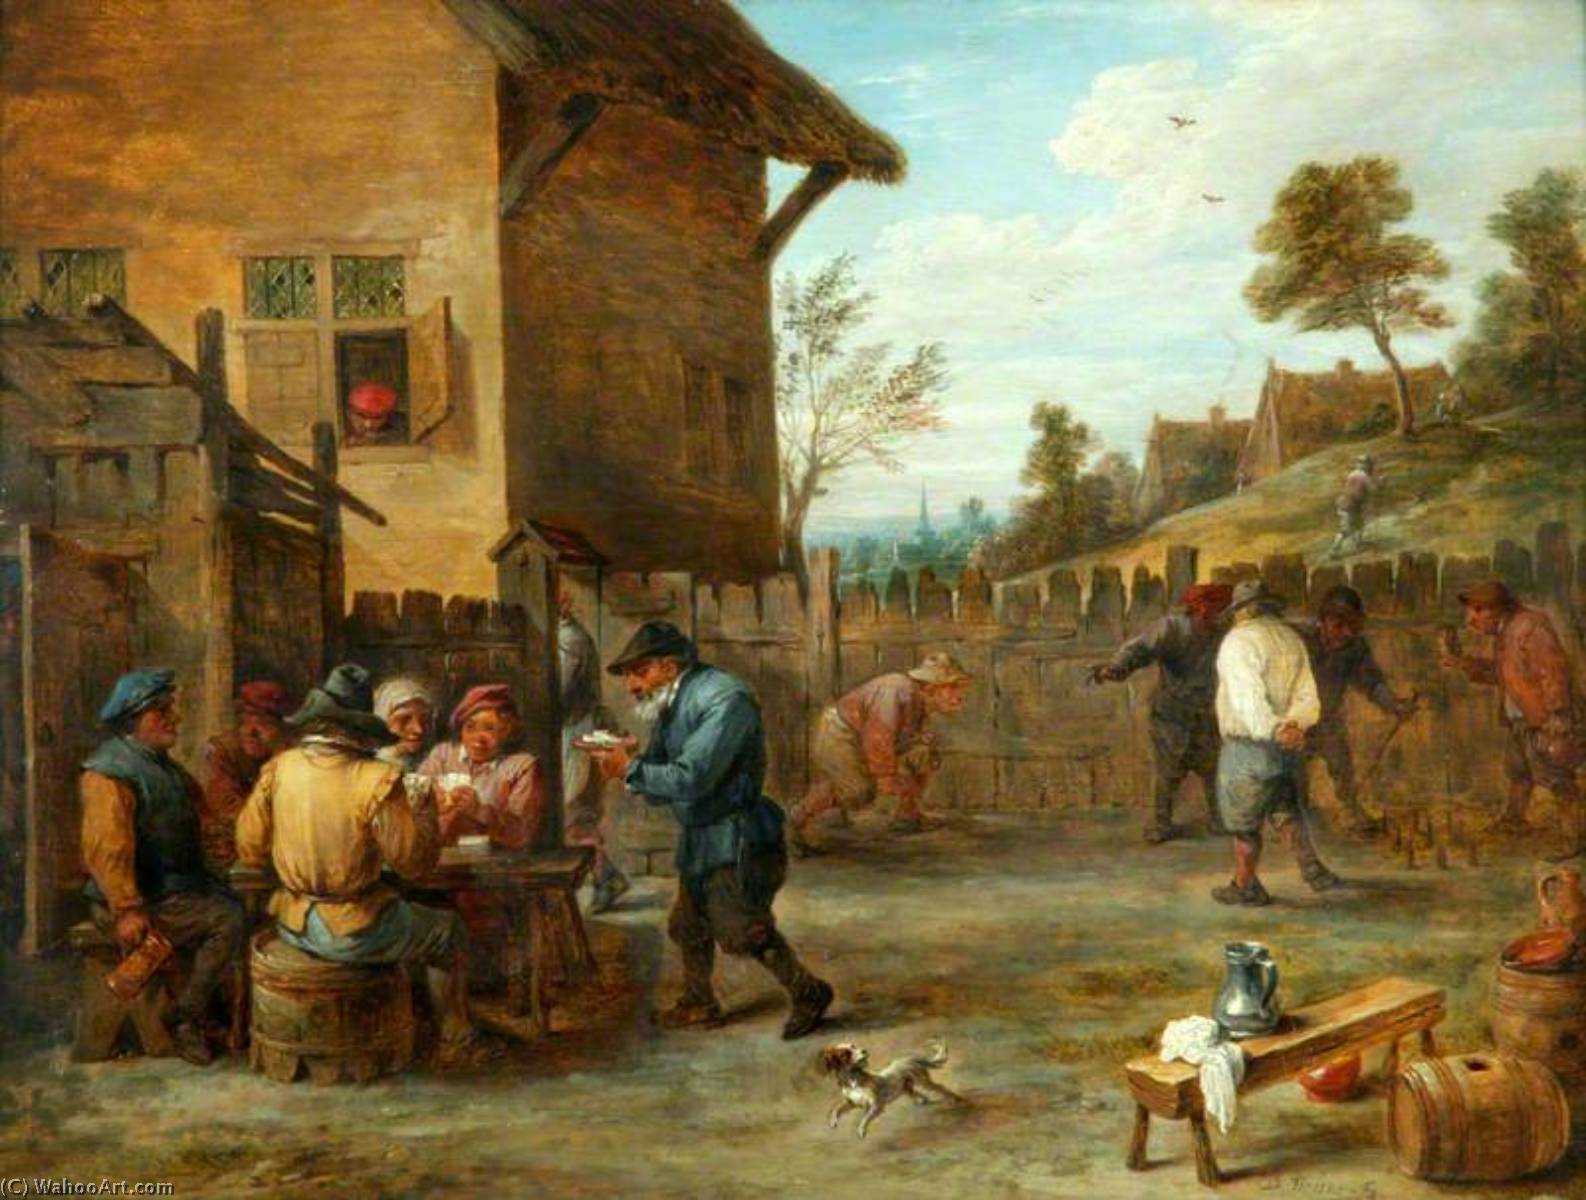 WikiOO.org - دایره المعارف هنرهای زیبا - نقاشی، آثار هنری David The Younger Teniers - Peasants Playing Cards and Skittles in a Yard